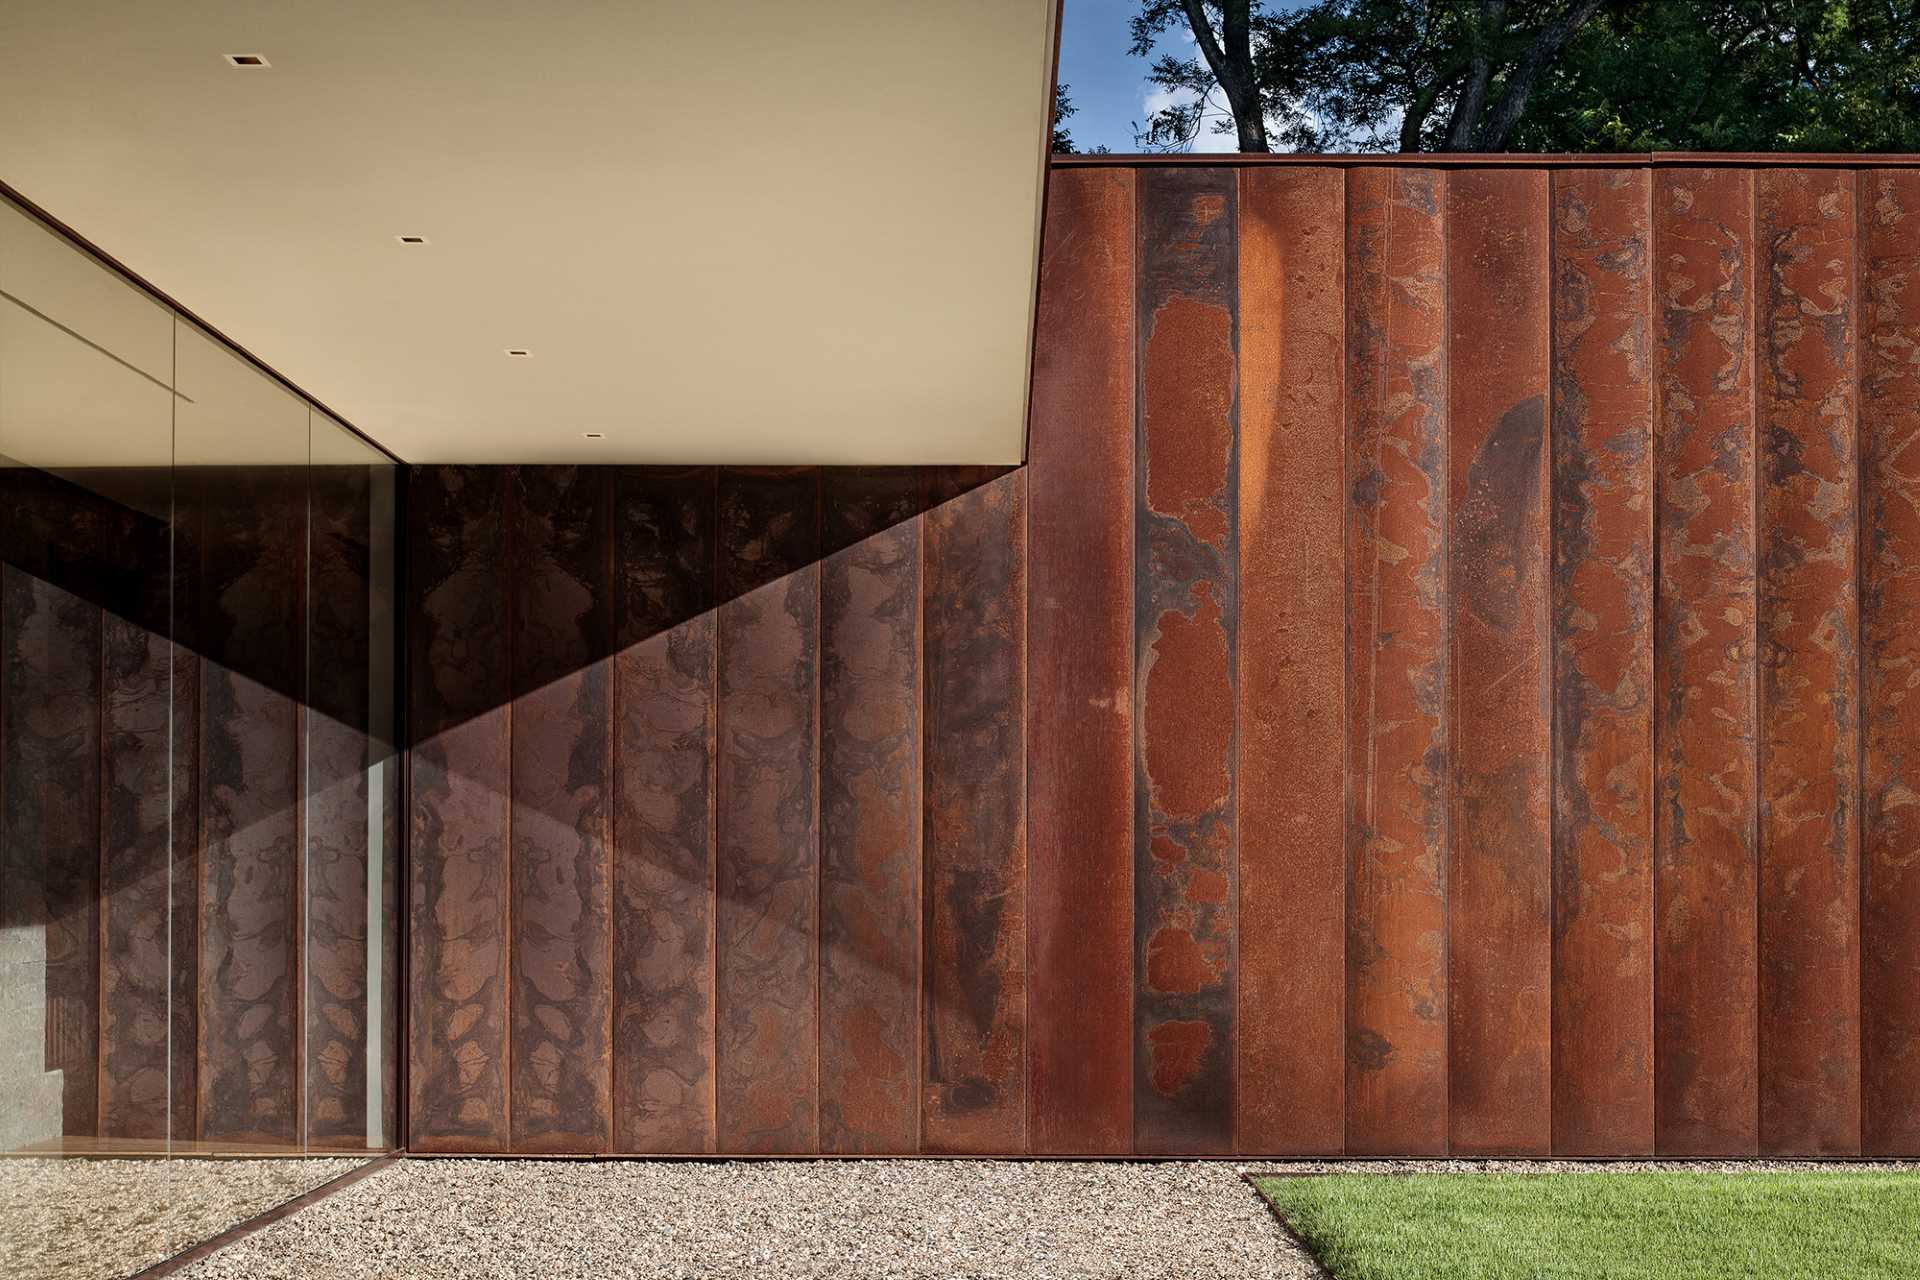 A modern house clad in weathering steel, ash wood accents, and windows, all of which help to create a modern appearance.